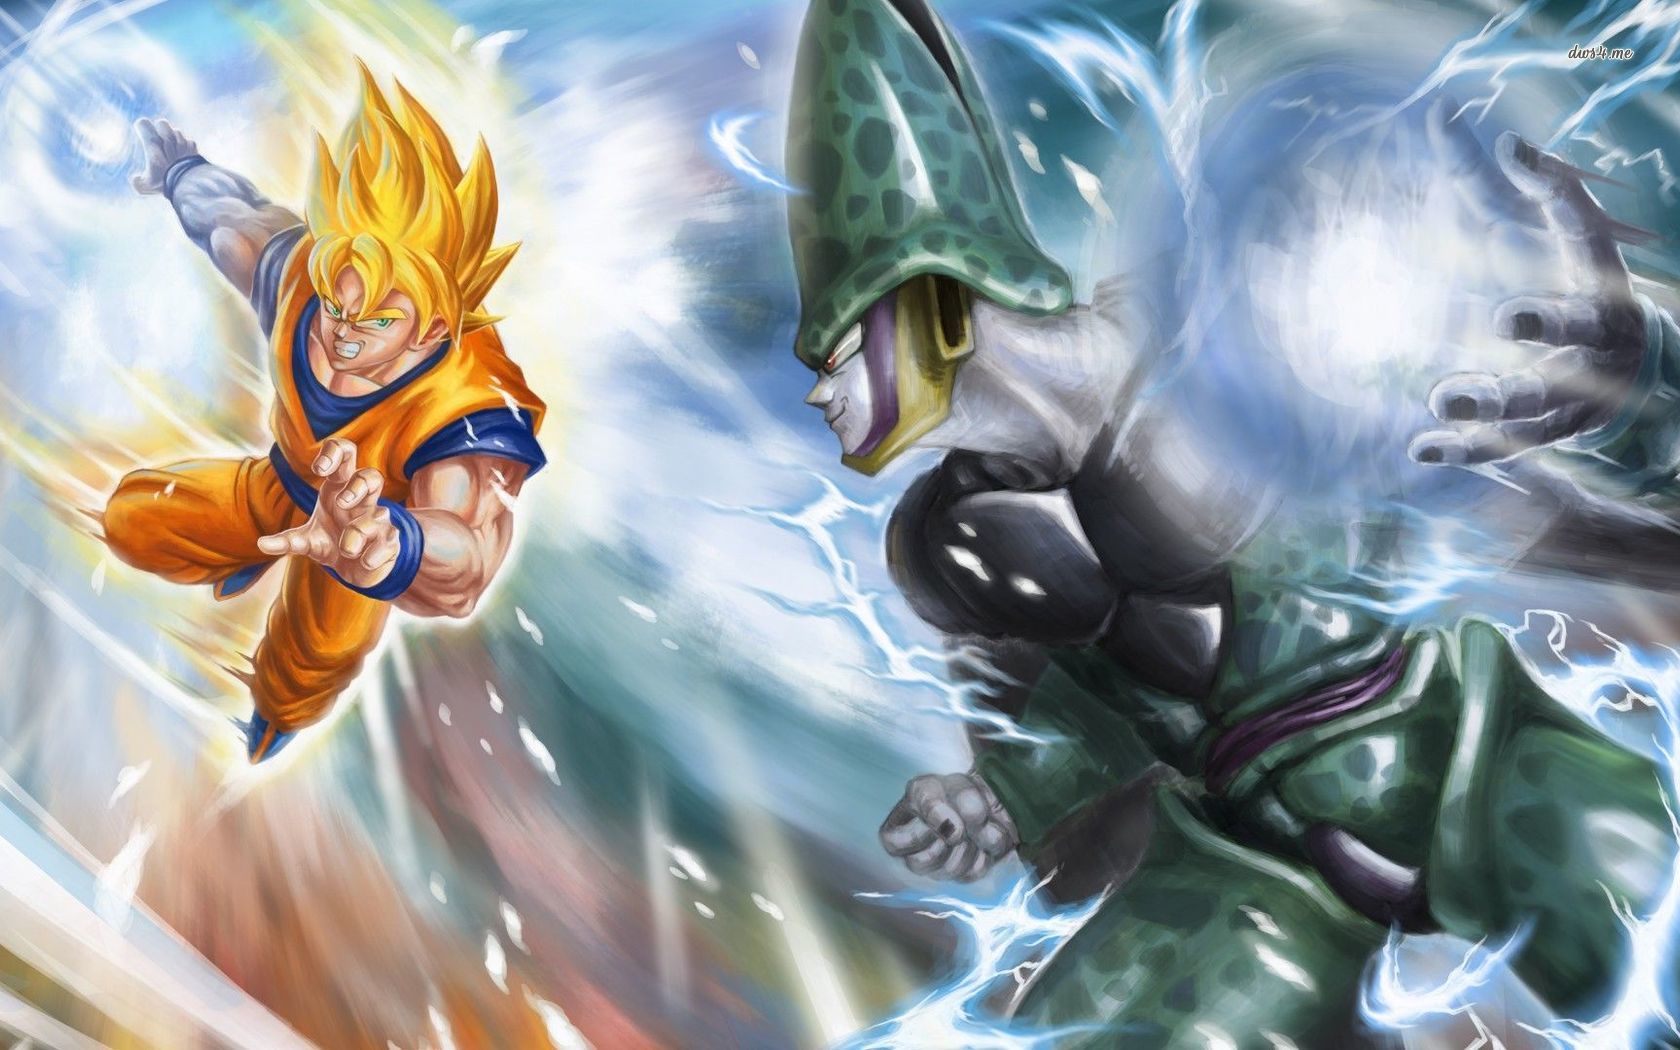 Dragon Ball Z fight with Vegeta wallpaper - Anime wallpapers - #43344